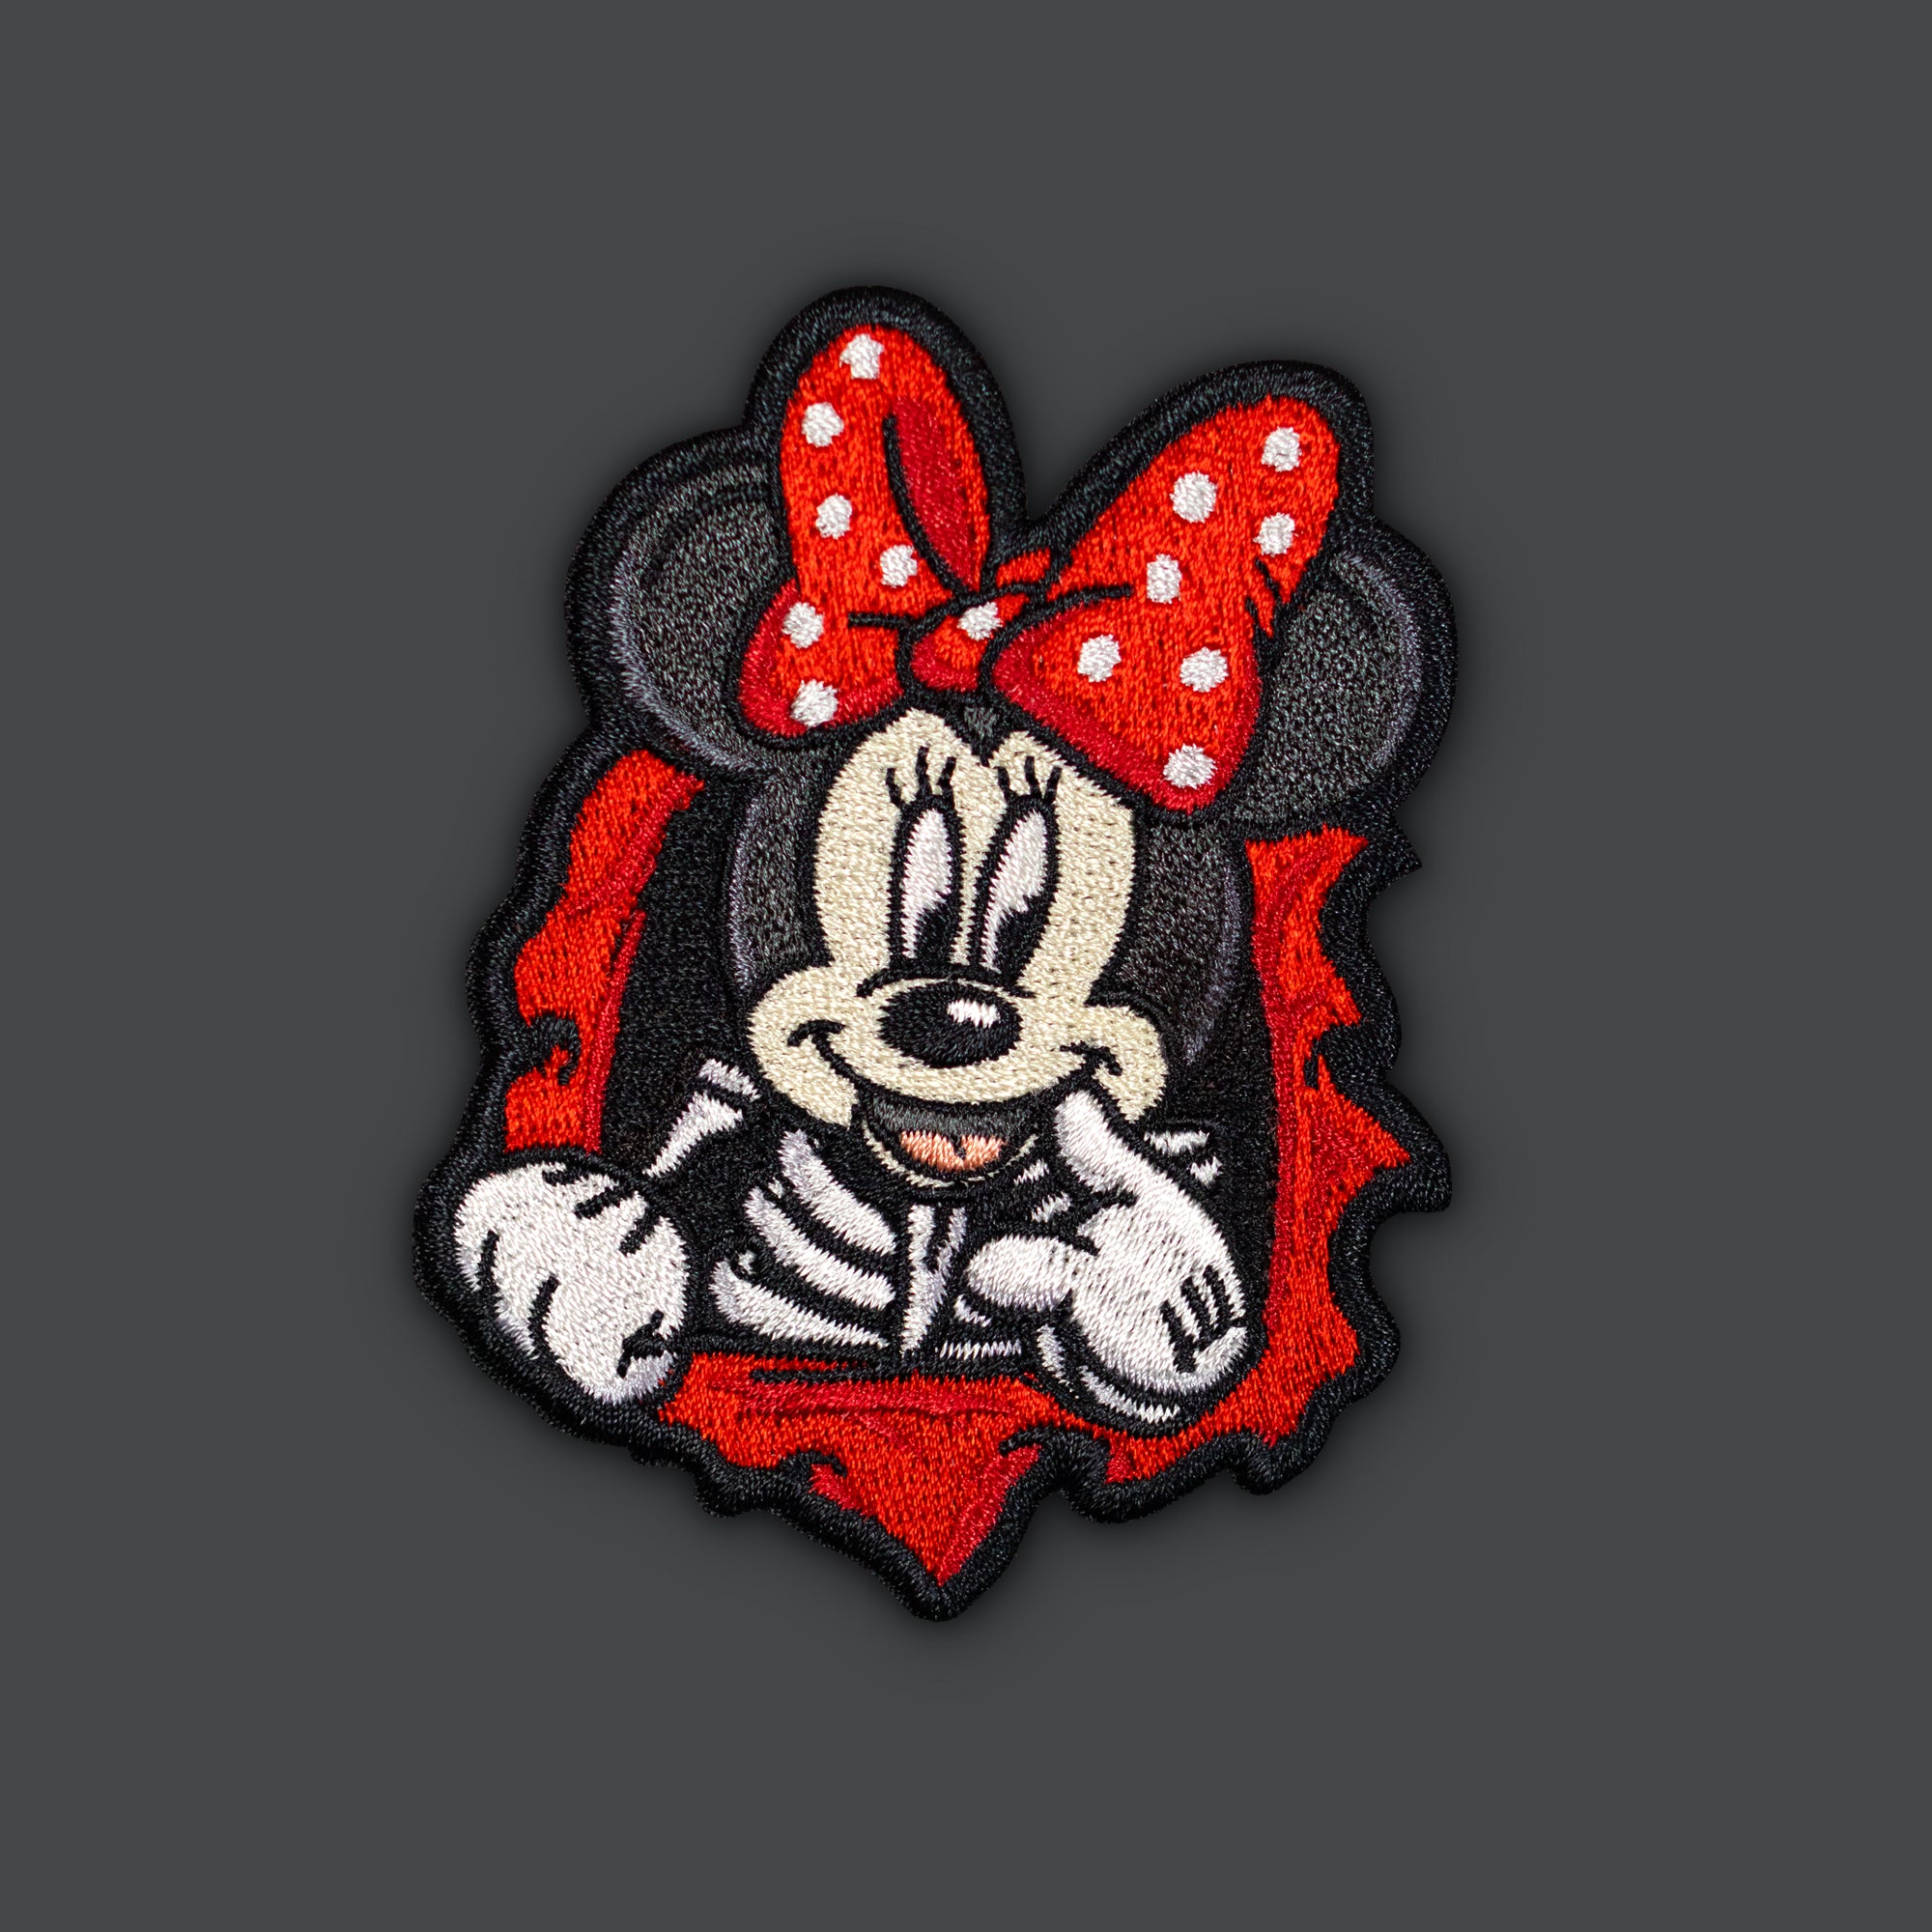 Old School Sk8 Ripper Girl Mouse Morale Patch